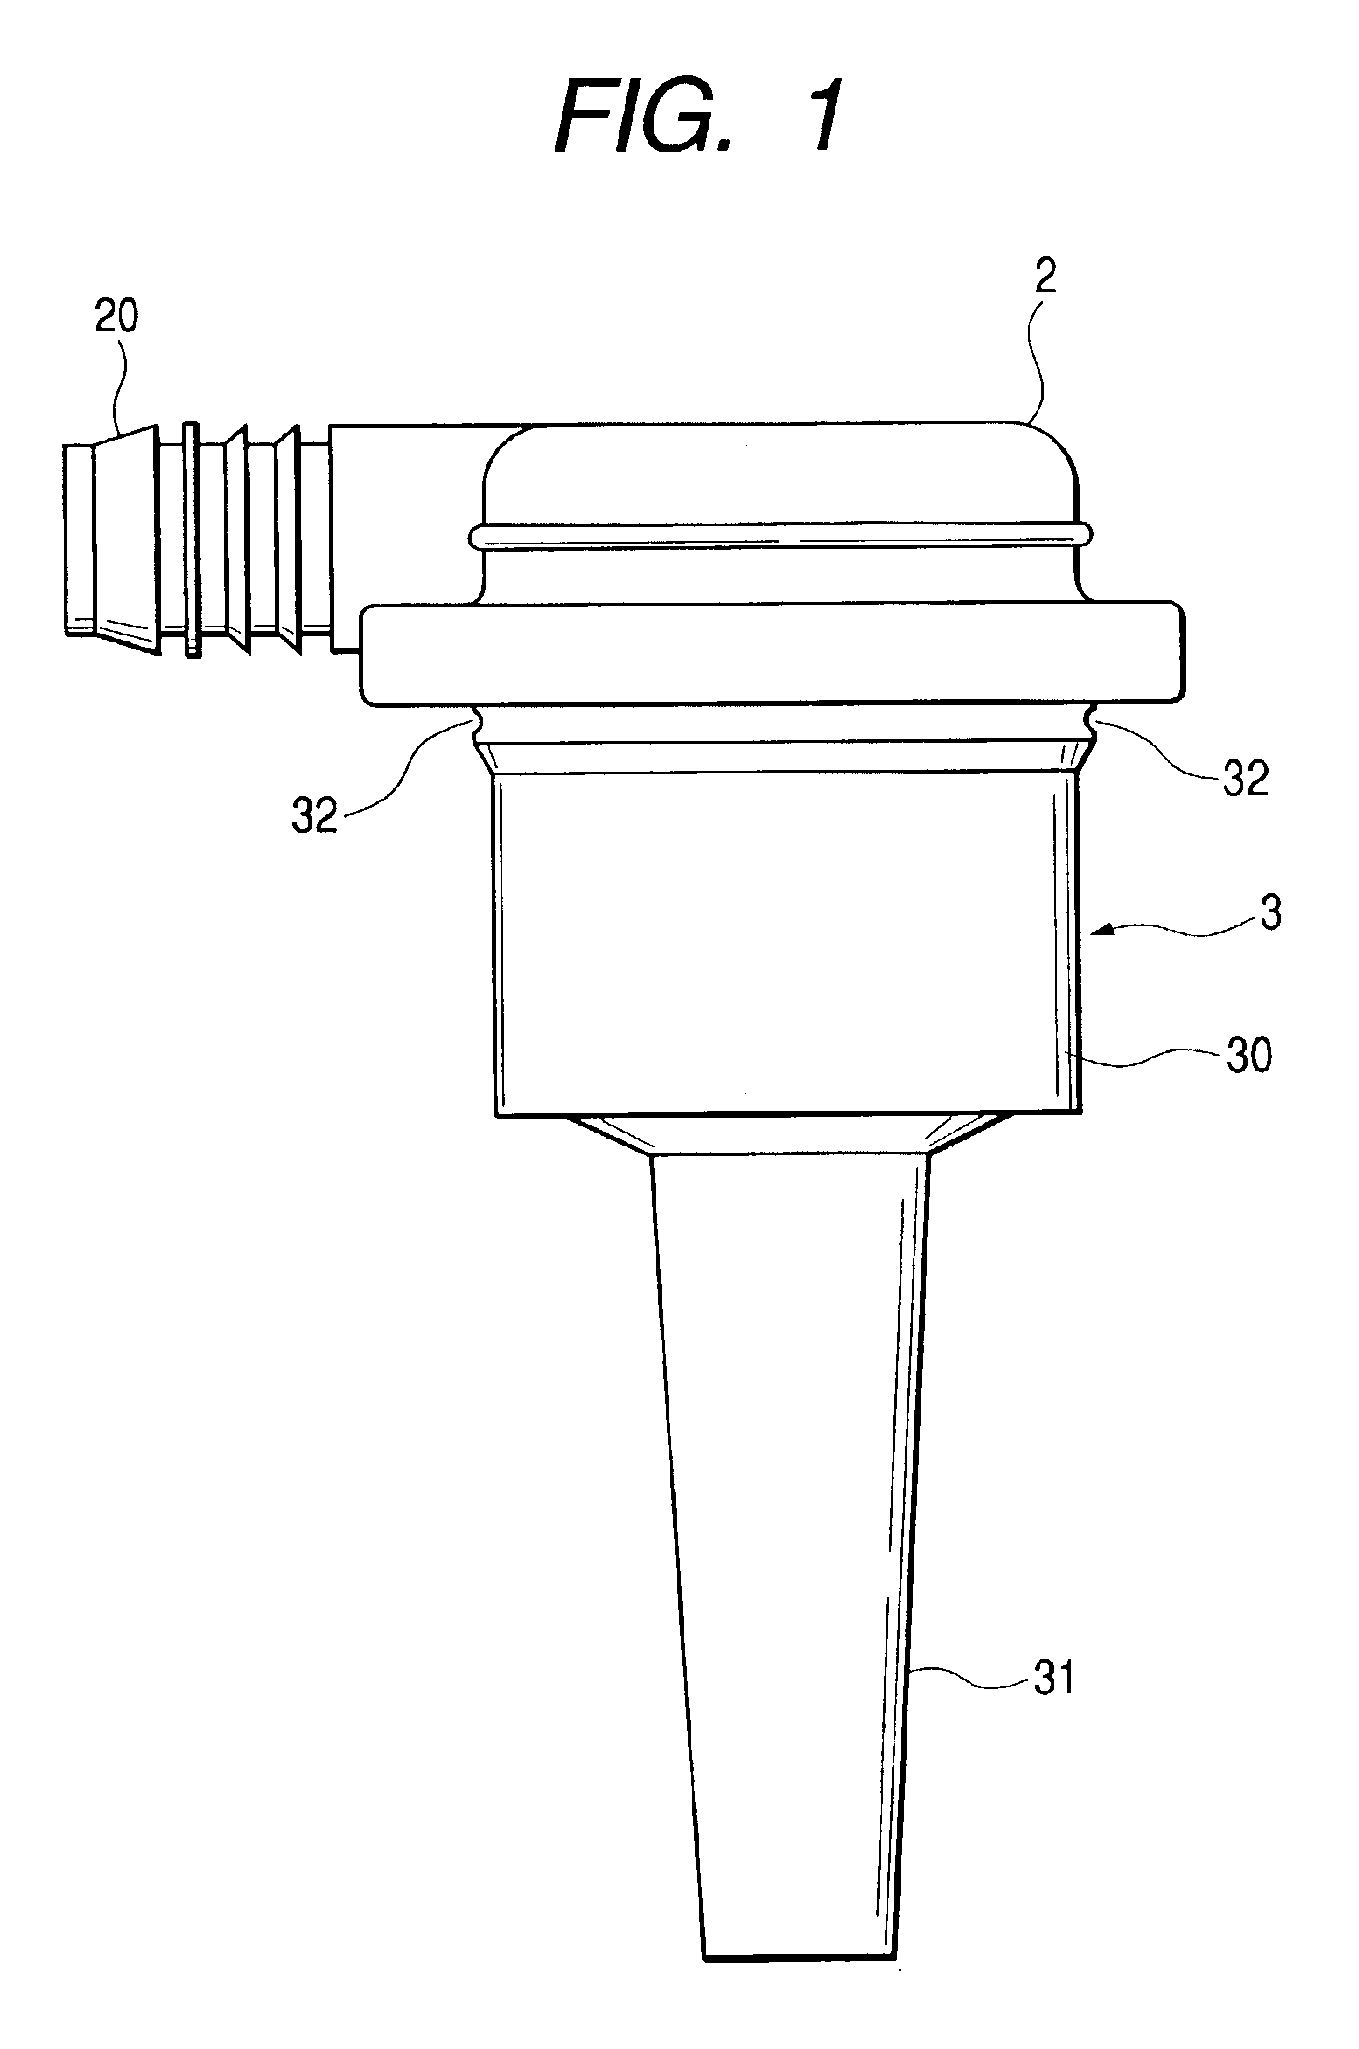 Outflow-limiting device of fuel tank